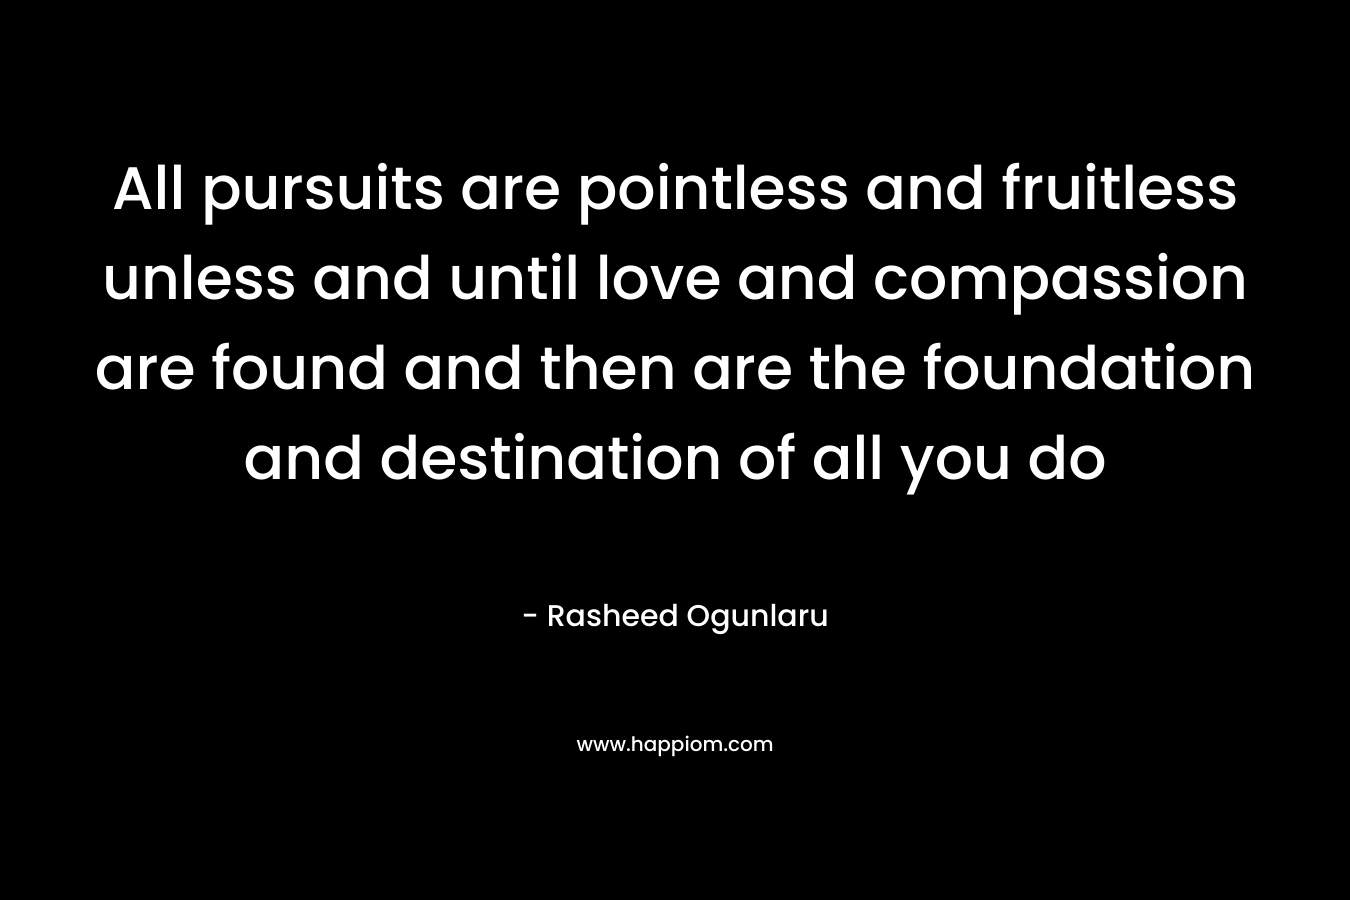 All pursuits are pointless and fruitless unless and until love and compassion are found and then are the foundation and destination of all you do